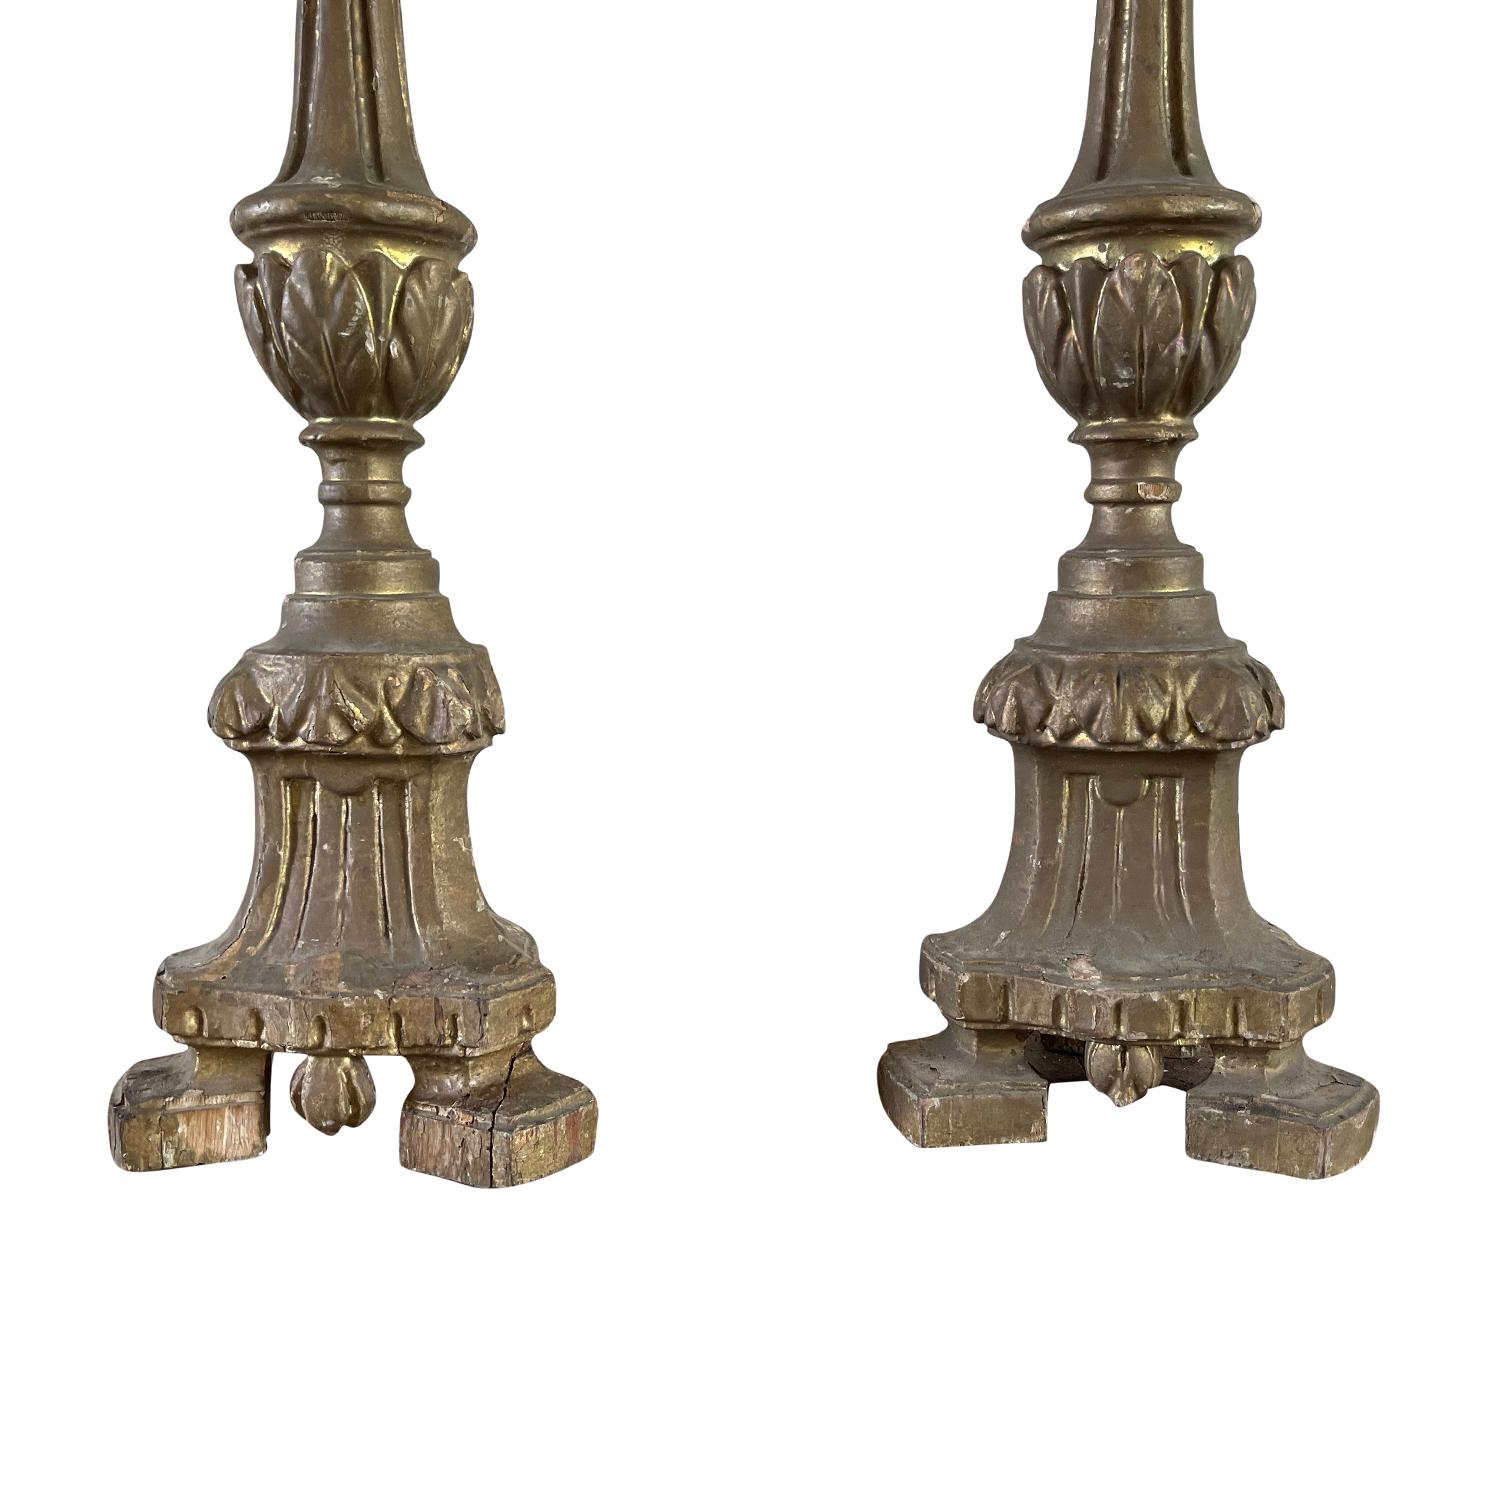 18th Century French Pair of Pinewood Candle Holders, Antique Sticks In Good Condition For Sale In West Palm Beach, FL